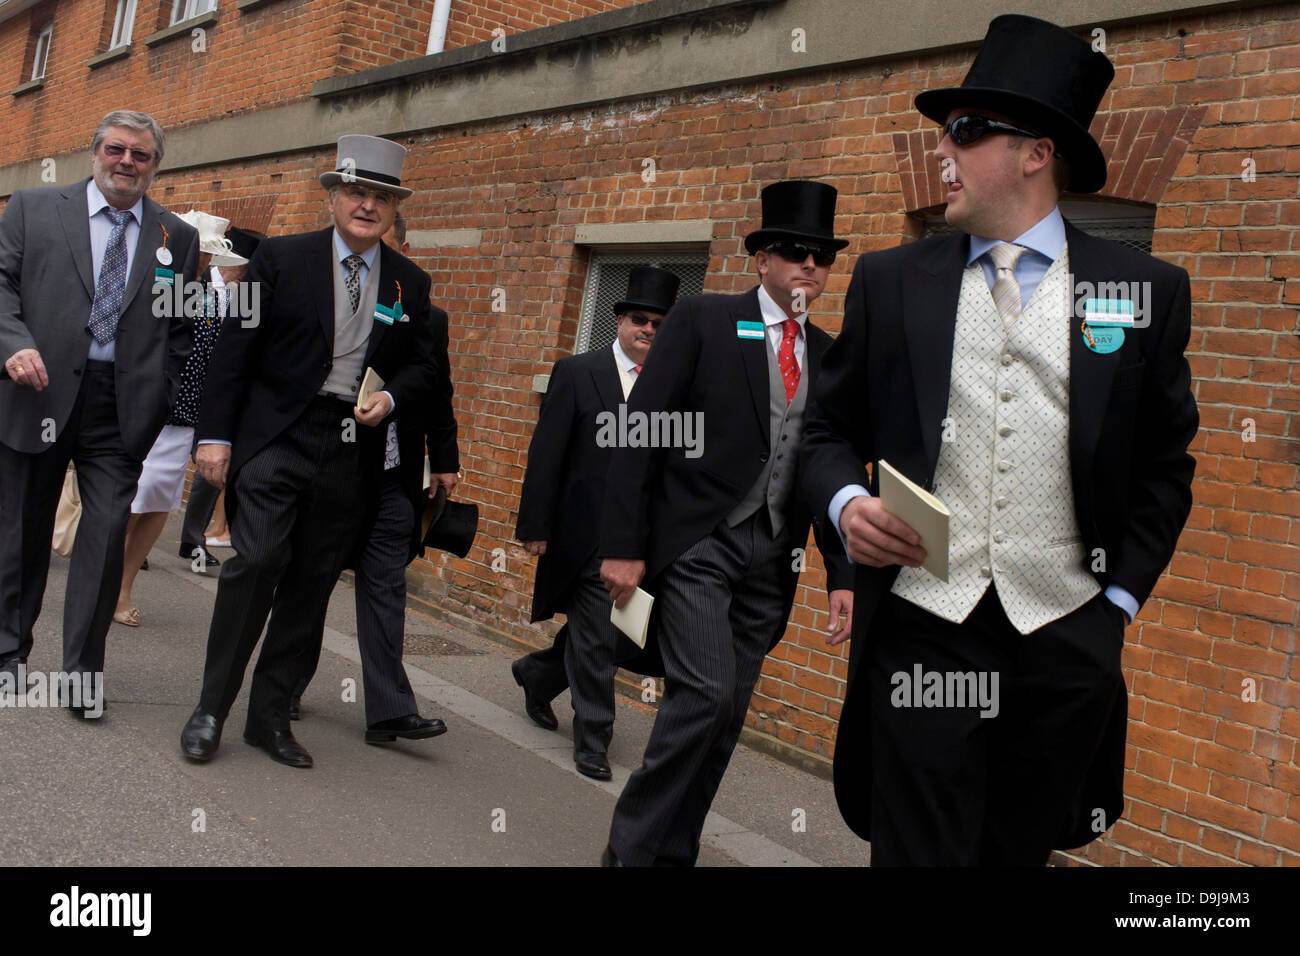 Formally-dressed gentlemen arrive at the racecourse during the annual Royal Ascot horseracing festival in Berkshire, England. Royal Ascot is one of Europe's most famous race meetings, and dates back to 1711. Queen Elizabeth and various members of the British Royal Family attend. Held every June, it's one of the main dates on the English sporting calendar and summer social season. Over 300,000 people make the annual visit to Berkshire during Royal Ascot week, making this Europe’s best-attended race meeting with over £3m prize money to be won. Stock Photo